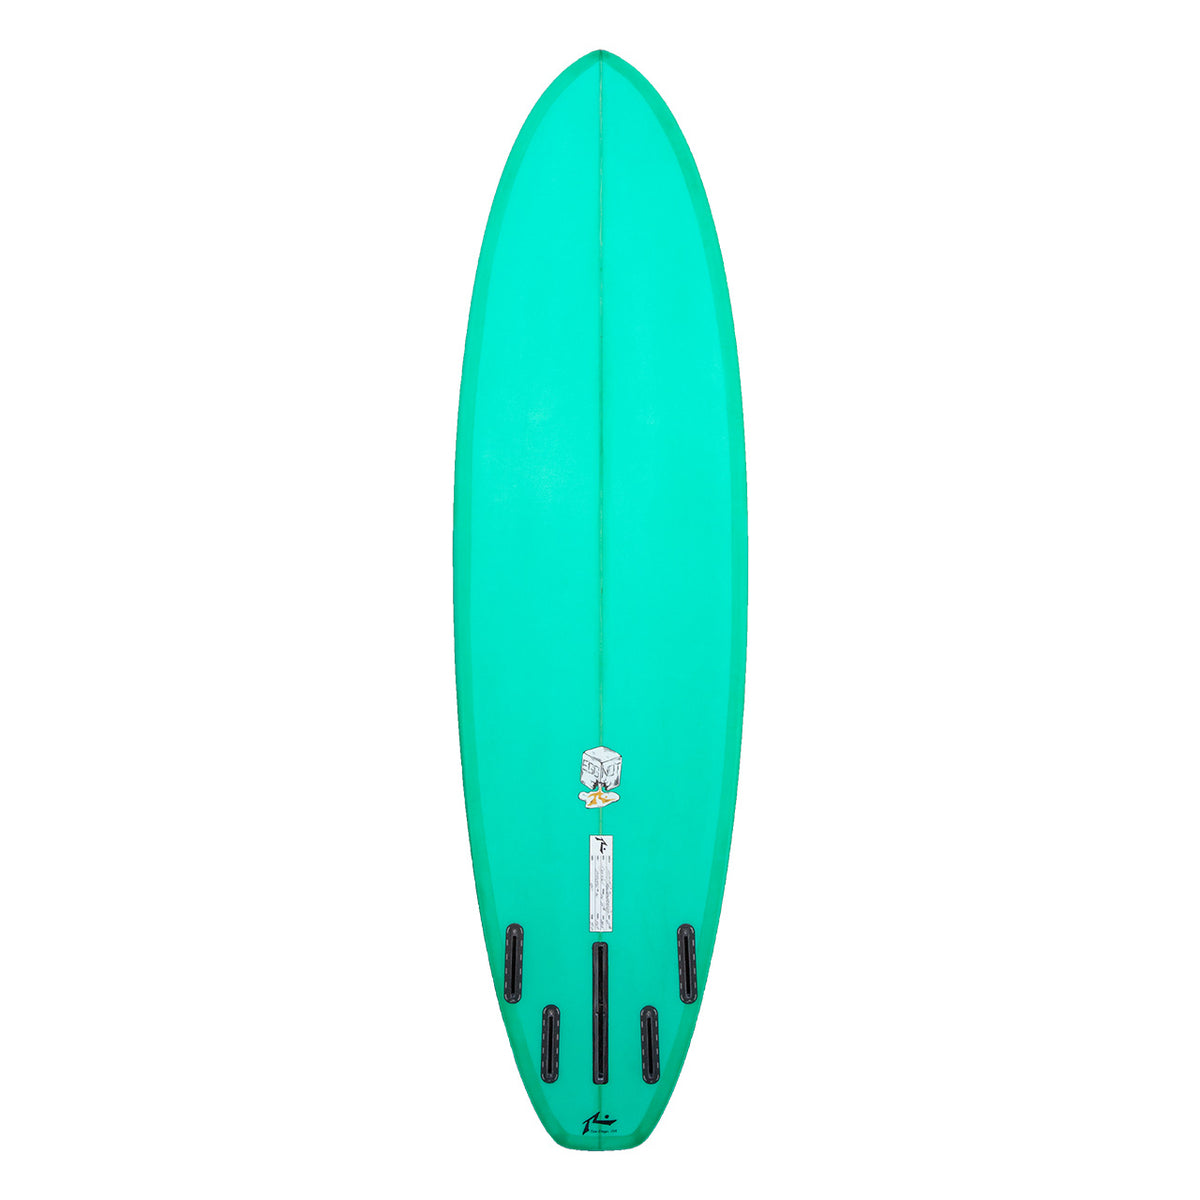 Egg Not - Made To Order - Mid Length - Mint Green - Bottom View - Rusty Surfboards